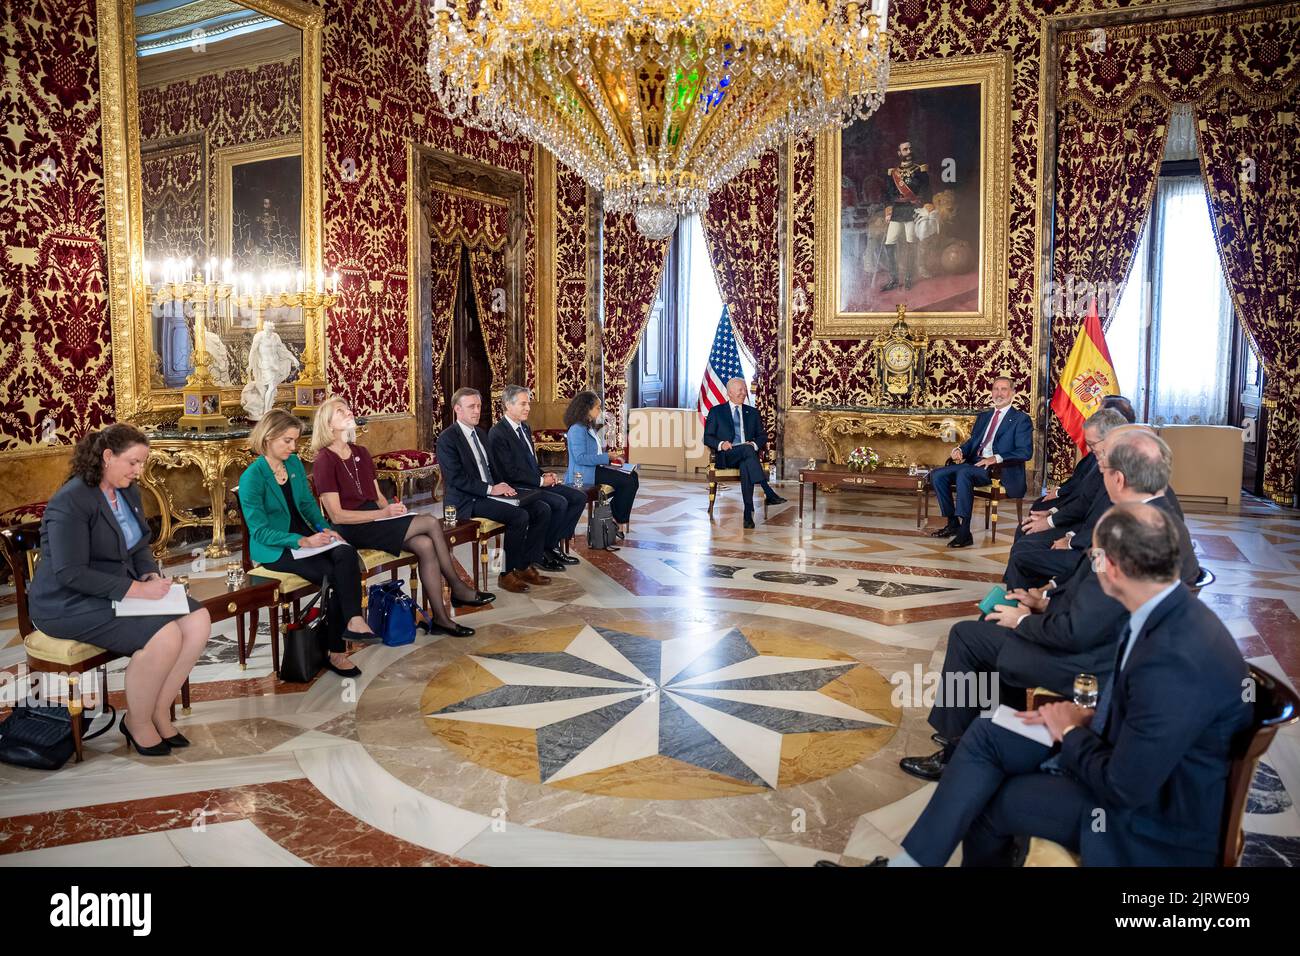 President Joe Biden participates in a bilateral meeting with King Felipe VI of Spain, Tuesday, June 28, 2022, at the Royal Palace of Madrid. (Official White House Photo by Adam Schultz) Stock Photo